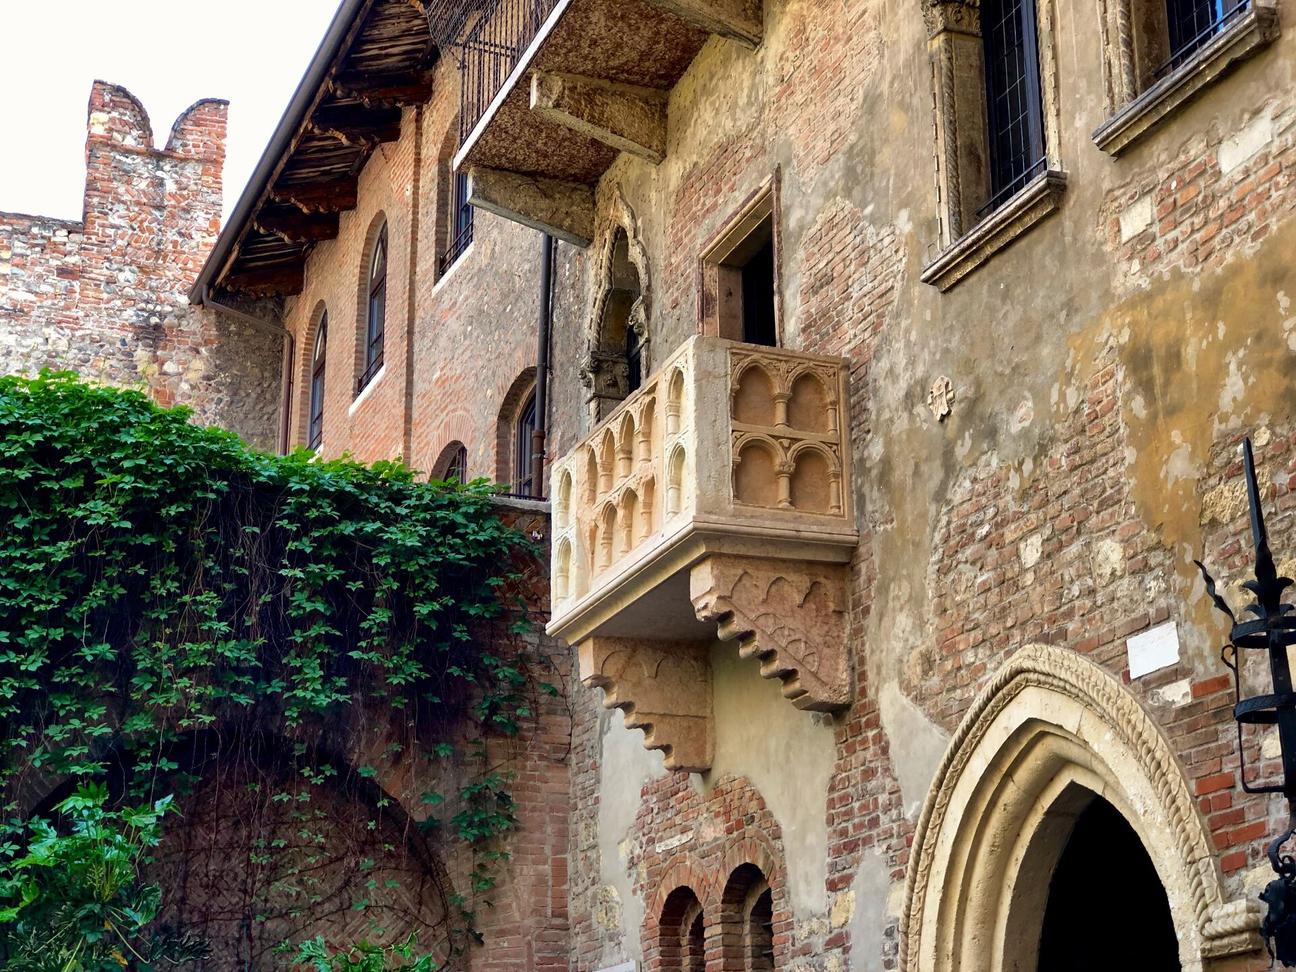 A photo of Juliet's House & Balcony